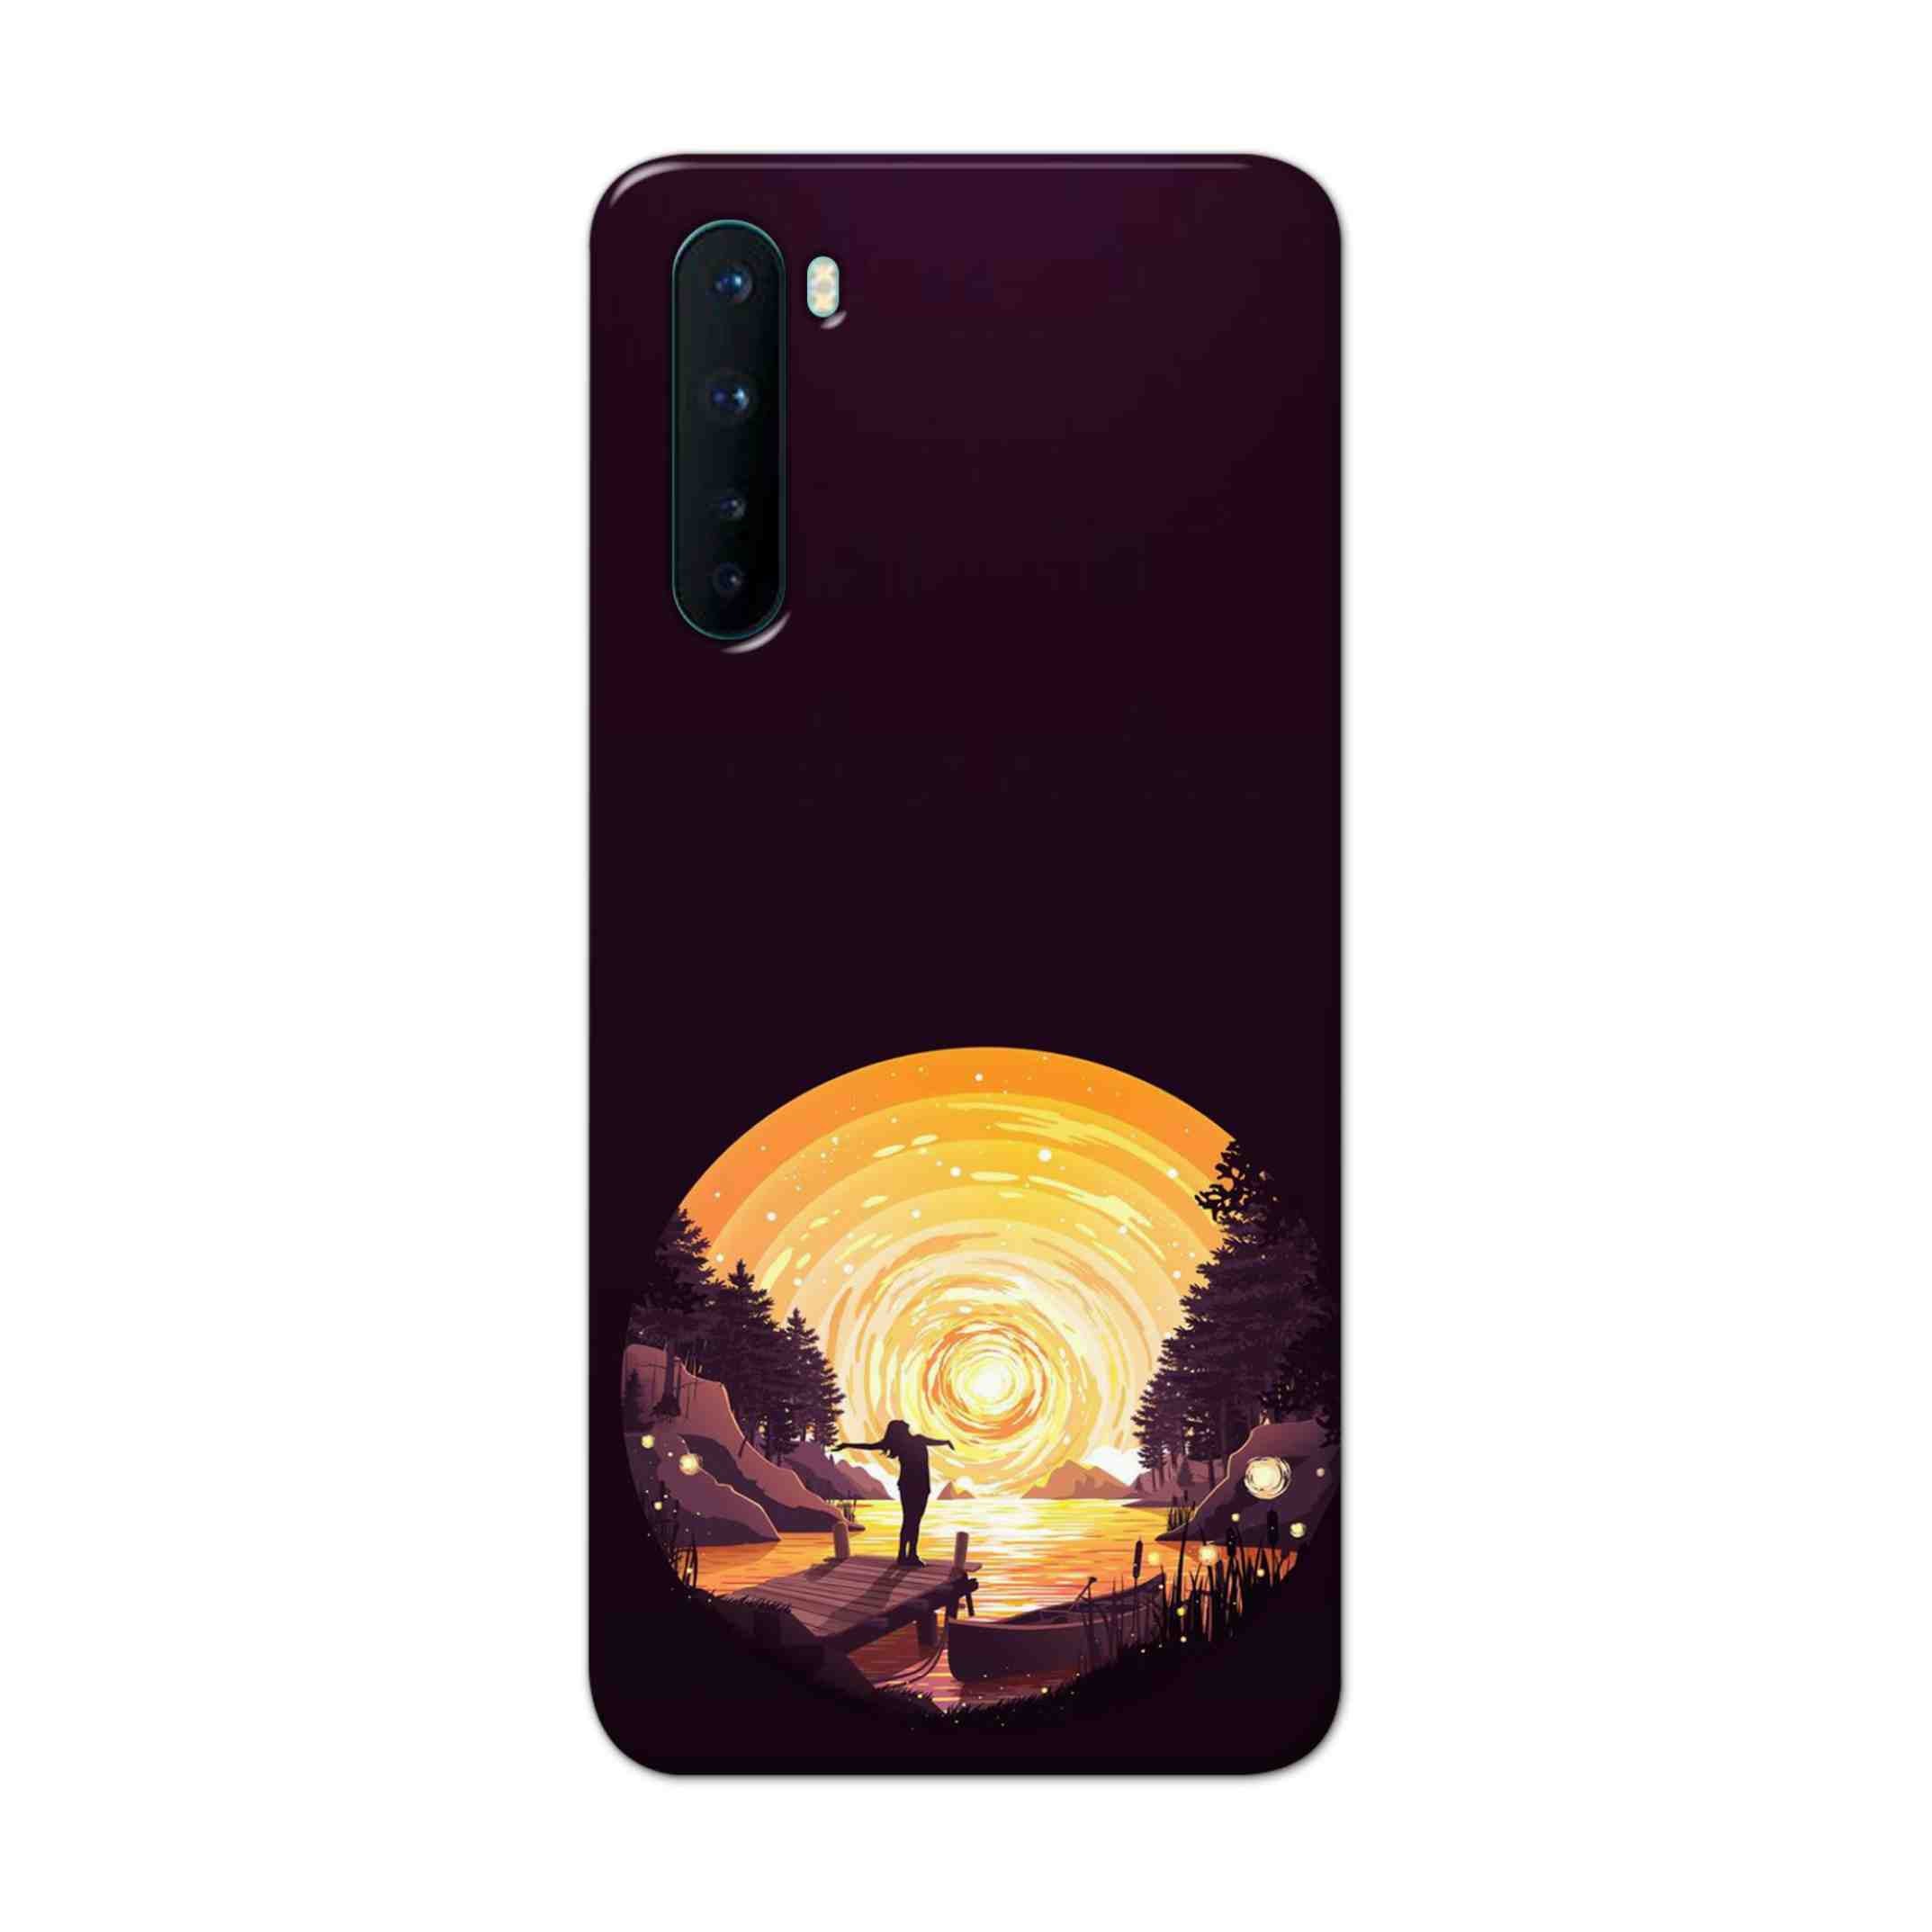 Buy Night Sunrise Hard Back Mobile Phone Case Cover For OnePlus Nord Online